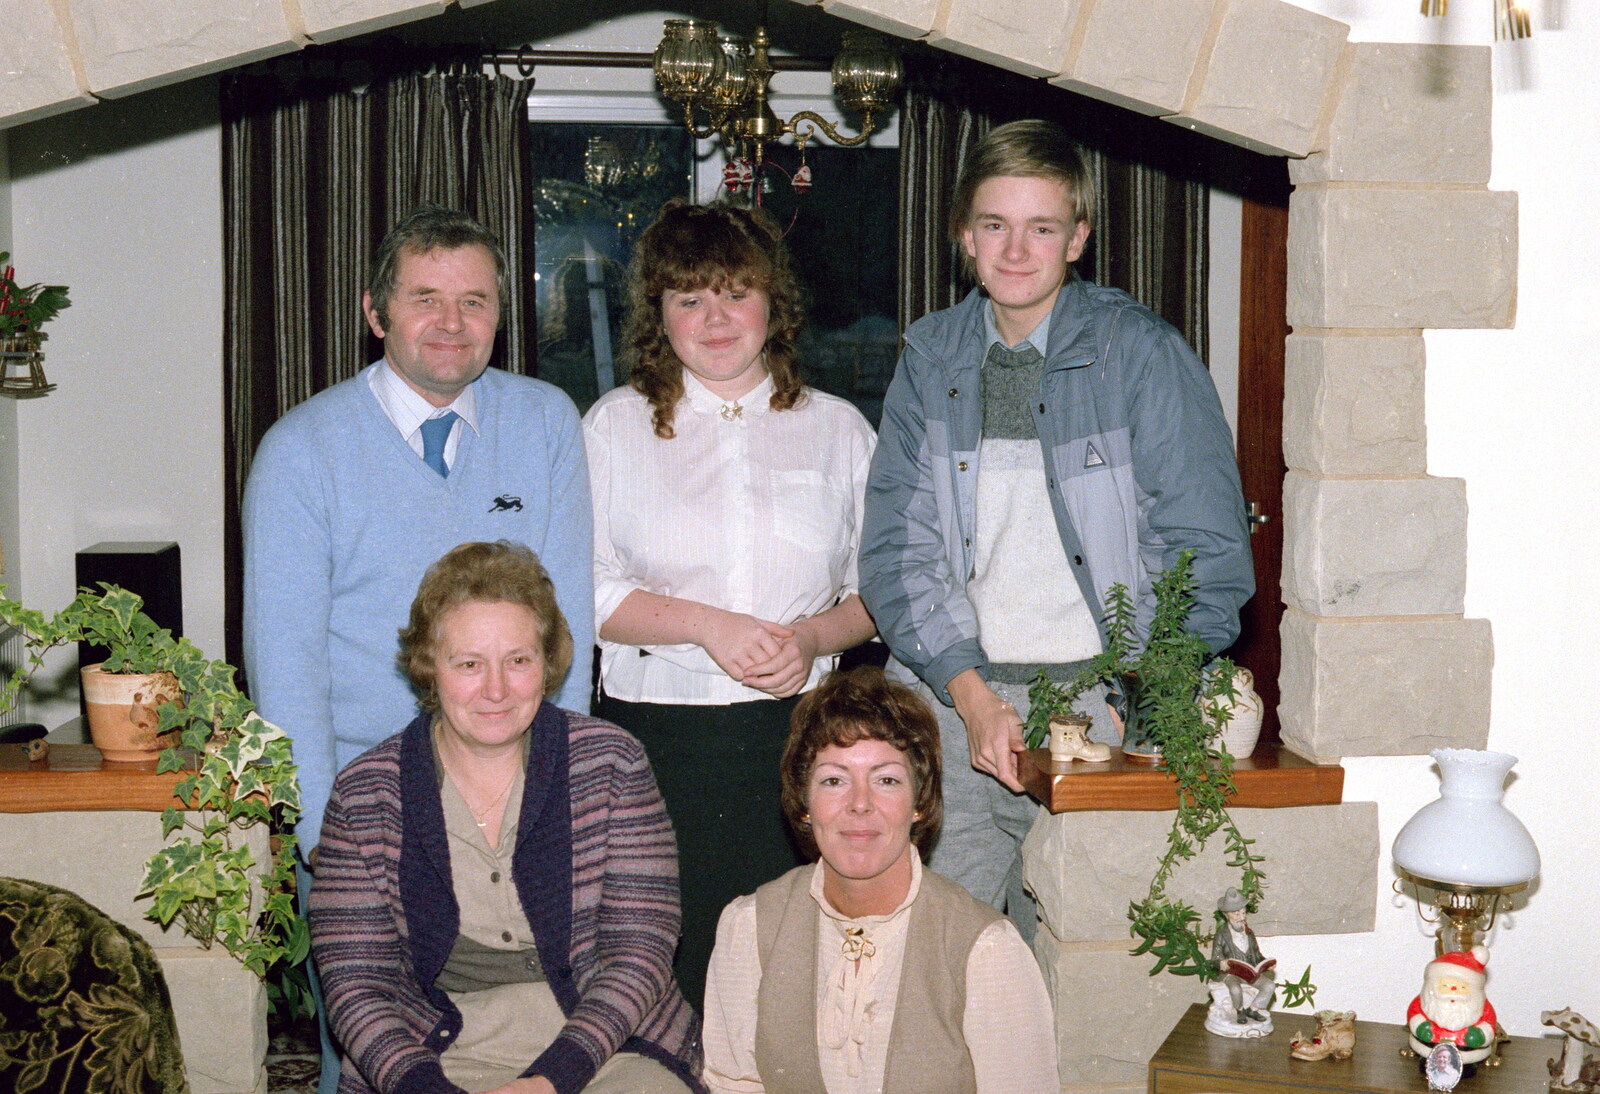 Nosher in a family photo from Christmas in Macclesfield and Wetherby, Cheshire  and Yorkshire - 25th December 1985